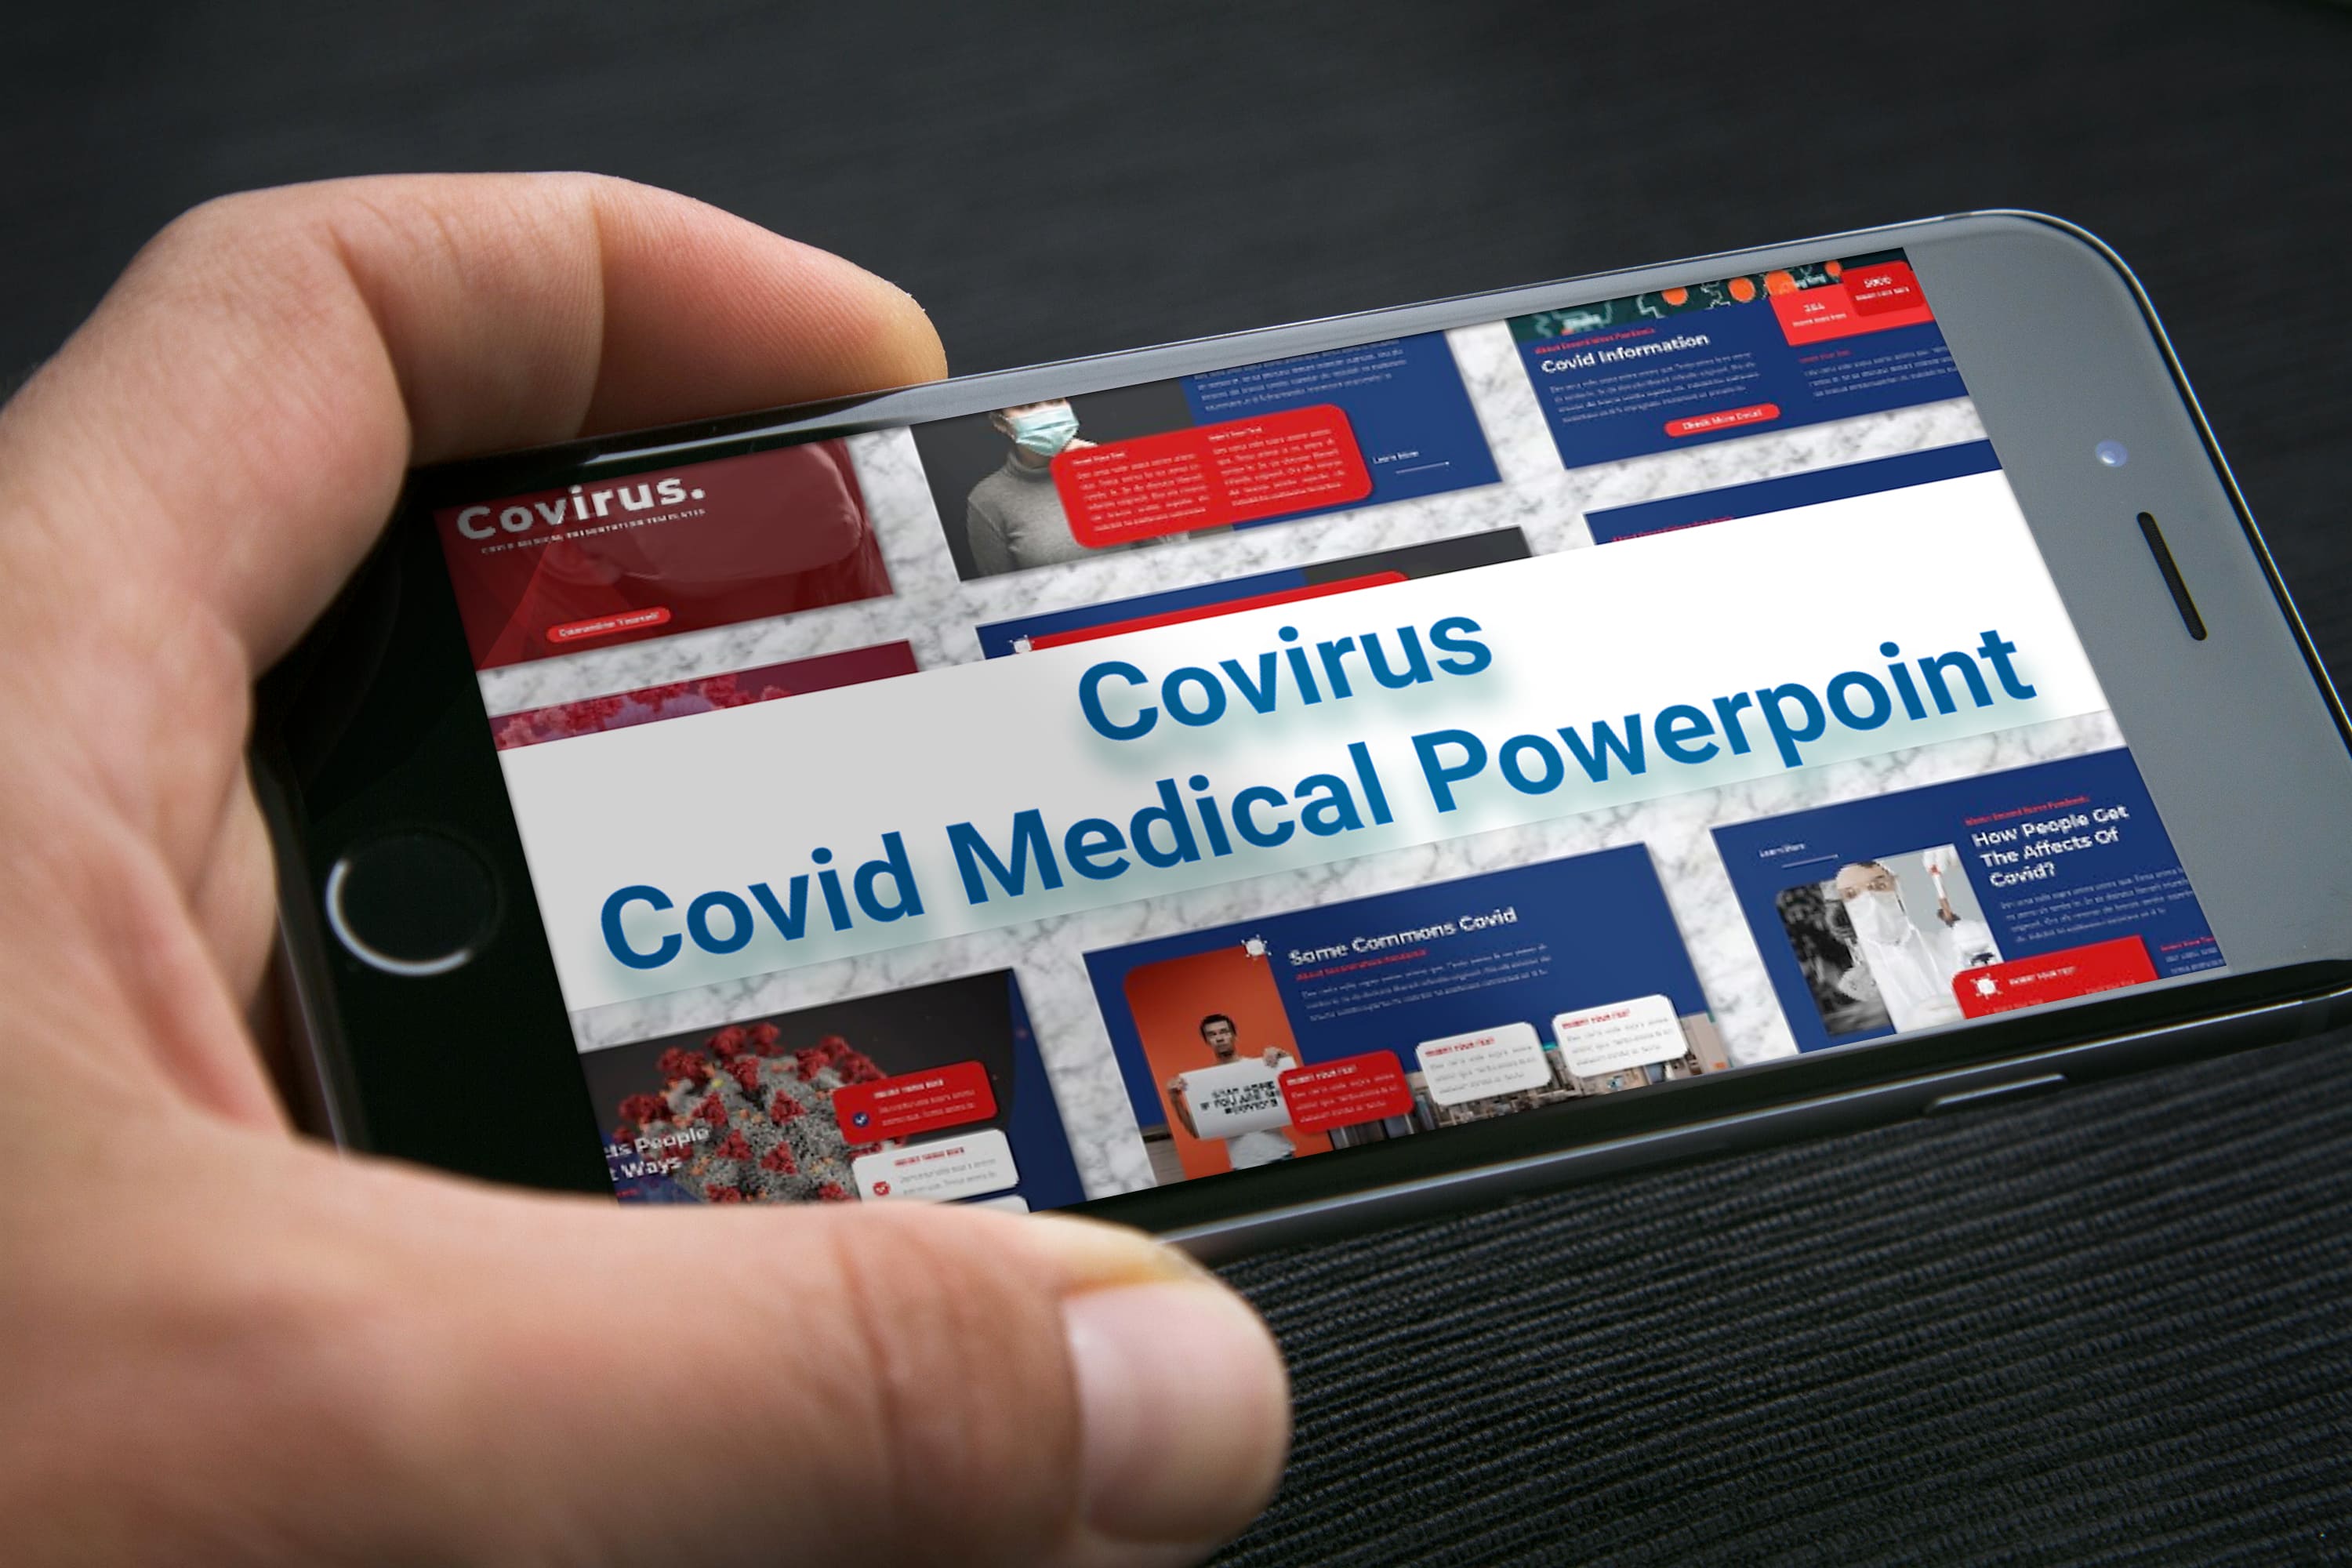 Mobile option of the Covirus - Covid Medical Powerpoint.